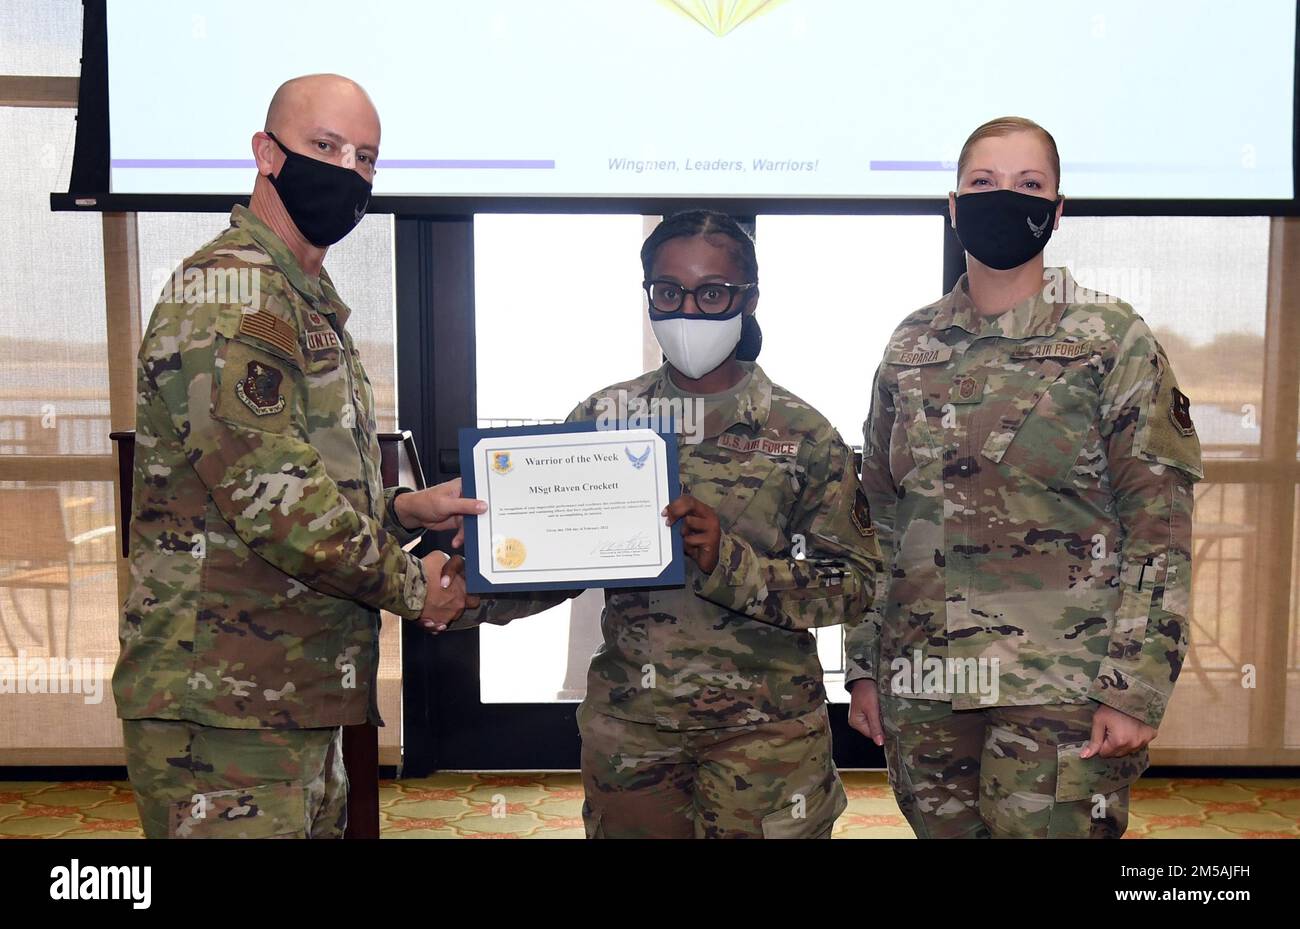 Let's give Master Sgt. Raven Crockett from the 403rd Mission Support Group a shout-out for being chosen as the Warrior of the Week during this week's staff meeting! Crockett has been expertly filling a Senior NCO position before being a Senior NCO. She has been leading a four-member quality assurance team and coordinating inspections for five AFSCs within the 403rd Logistics Readiness Squadron. Additionally, Crockett has been backfilling a position in the decentralized material support section fulltime, exemplifying a can-do attitude and boosting morale. She reflected the squadron routine insp Stock Photo